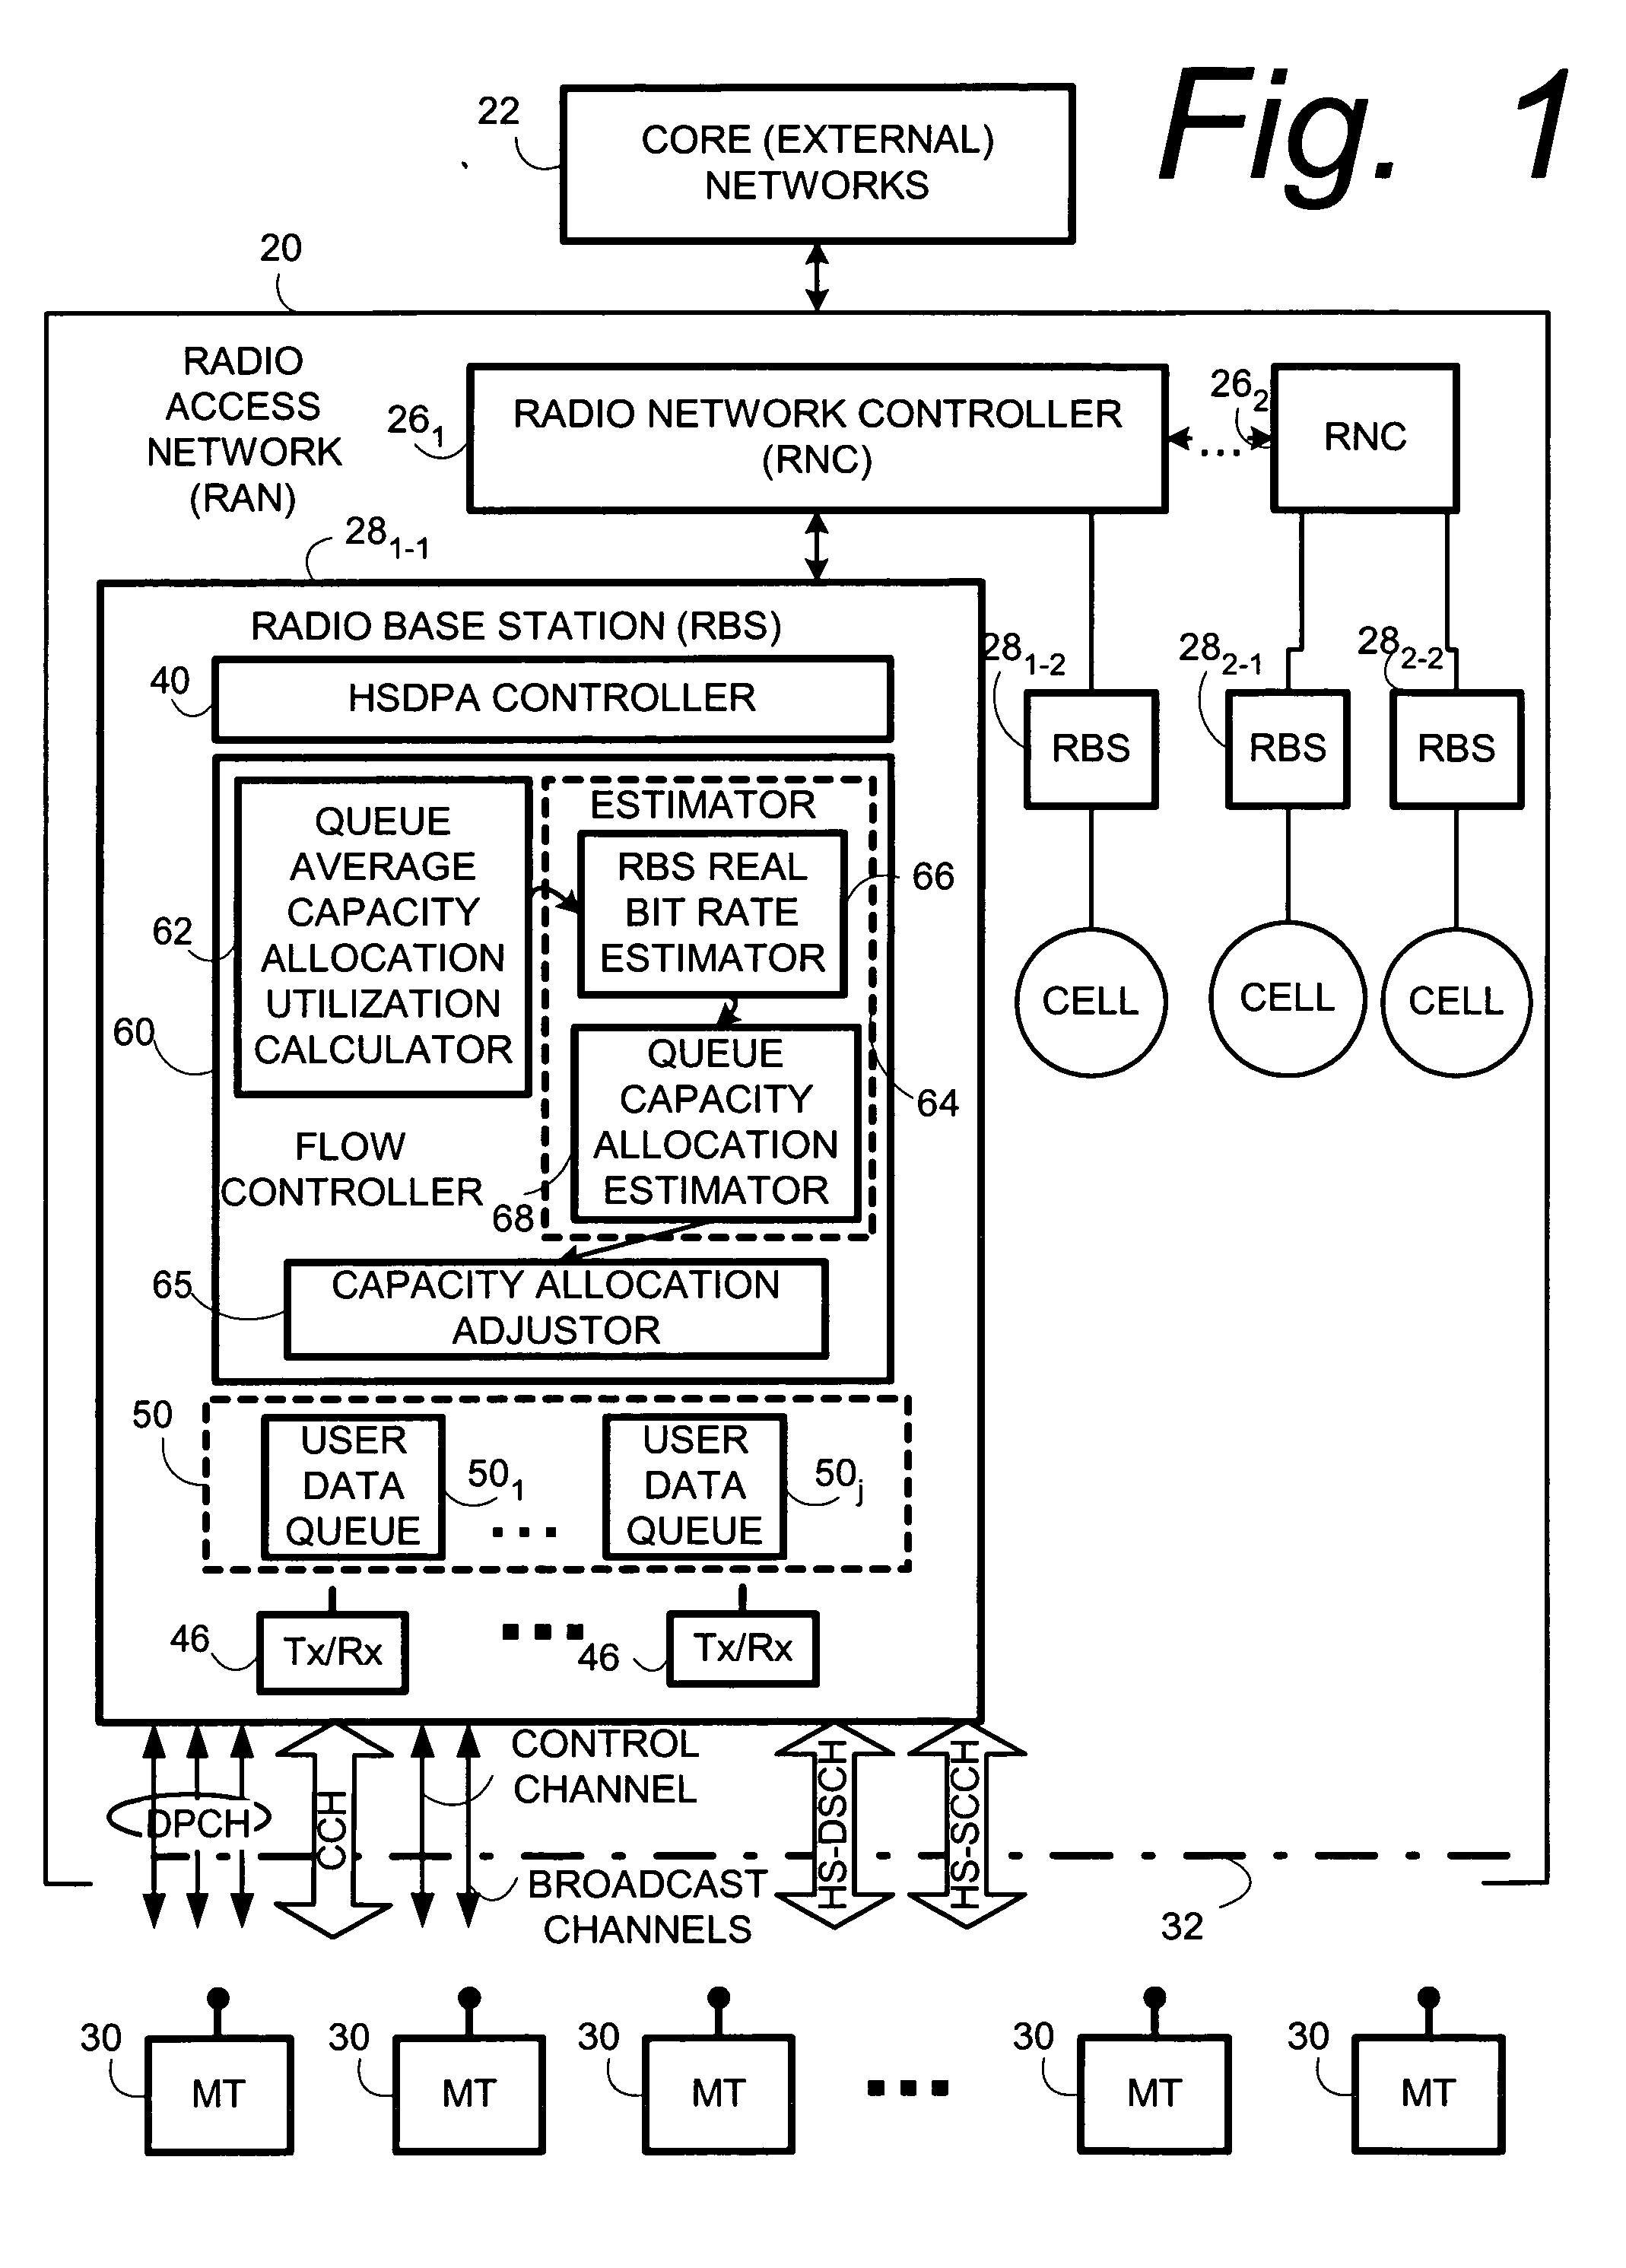 Flow control for low bitrate users on high-speed downlink